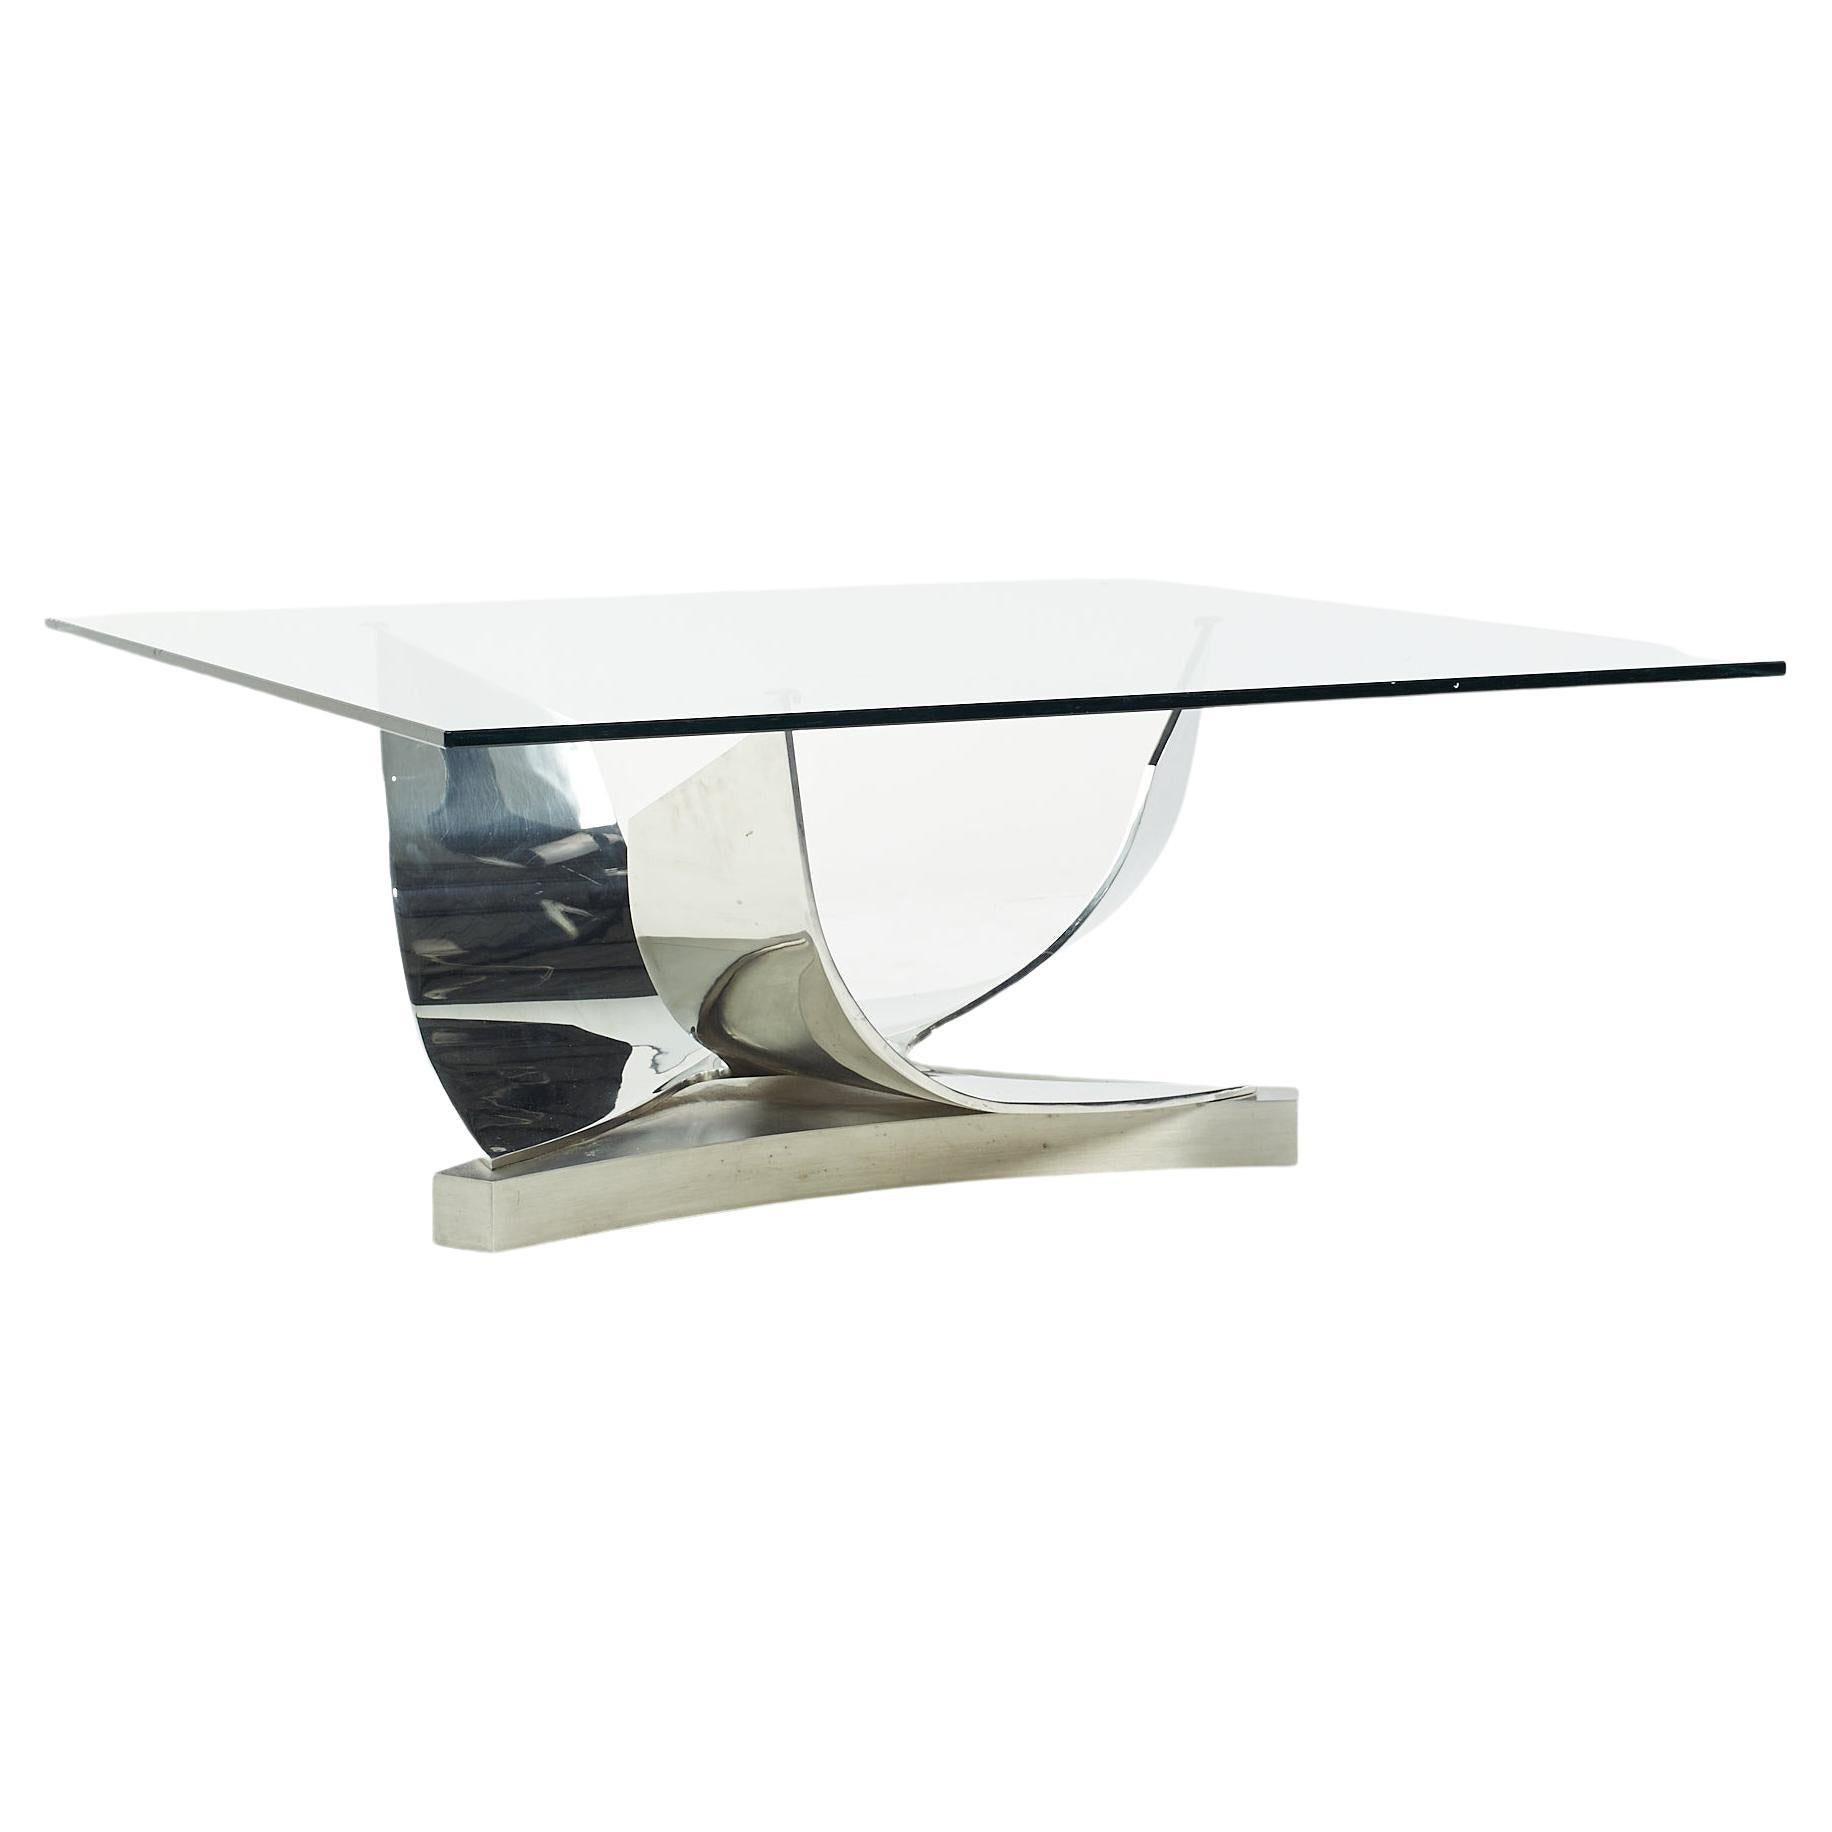 Ron Seff Polished Chrome Stainless Steel and Glass Coffee Table For Sale